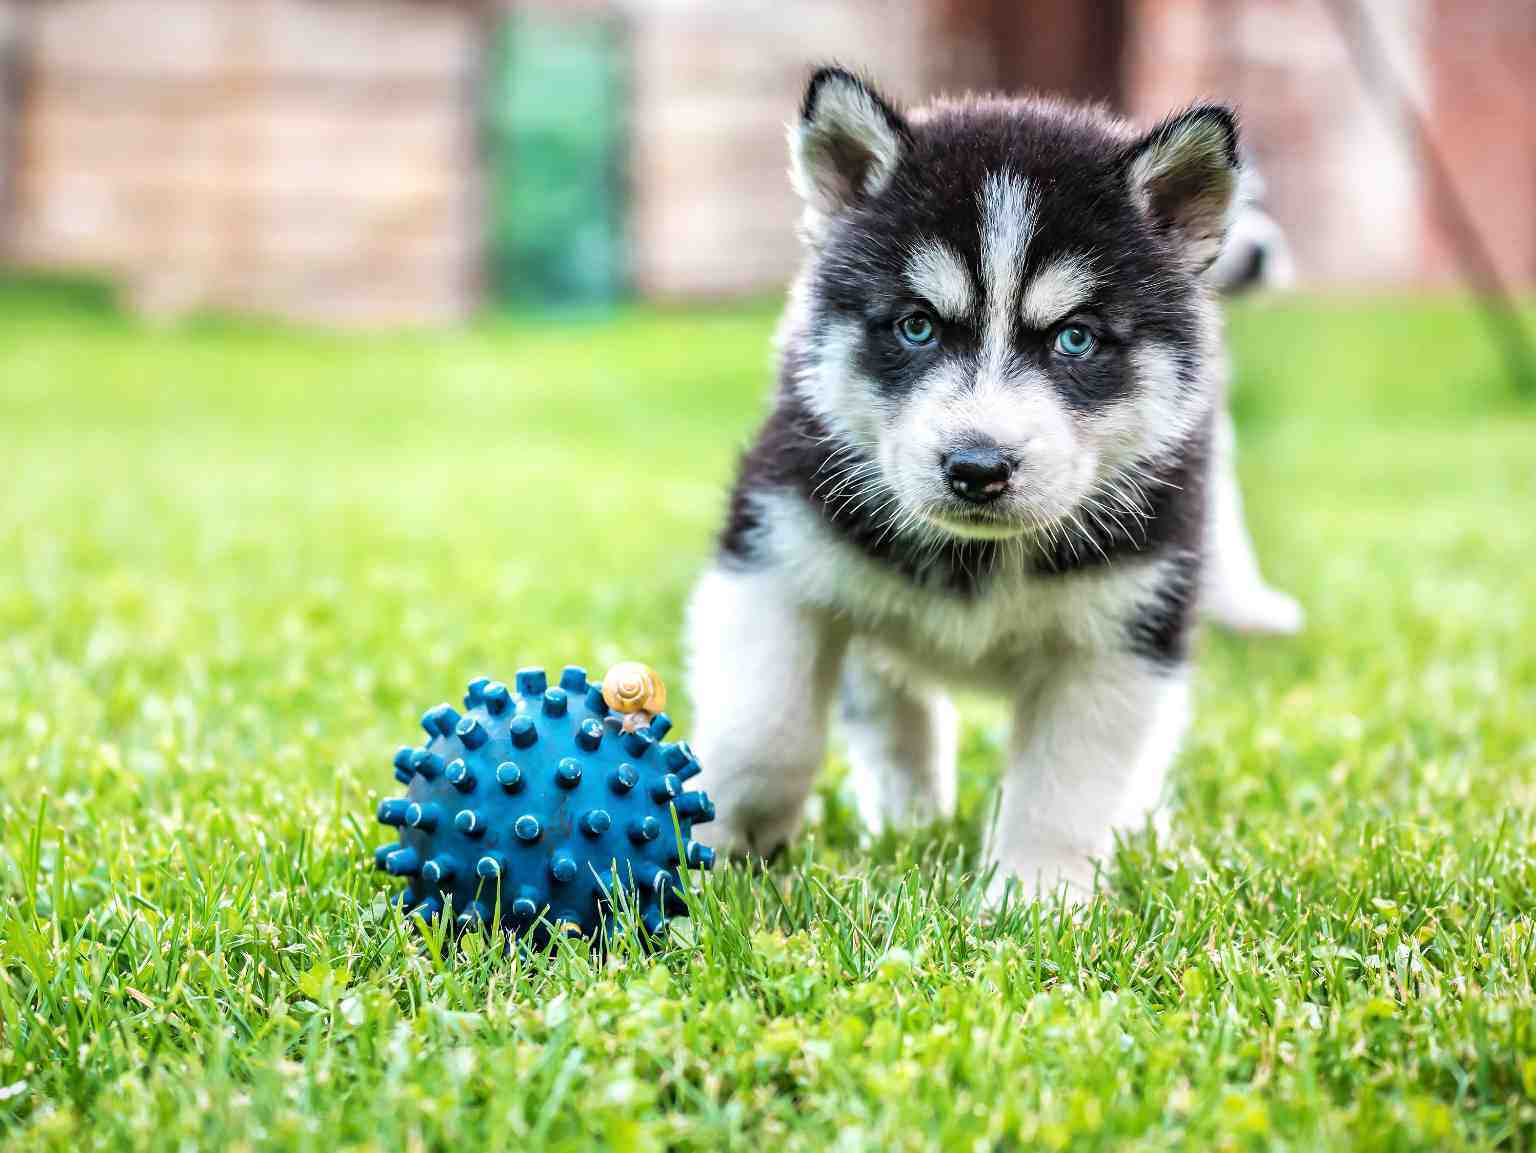 husy puppy playing with blue ball